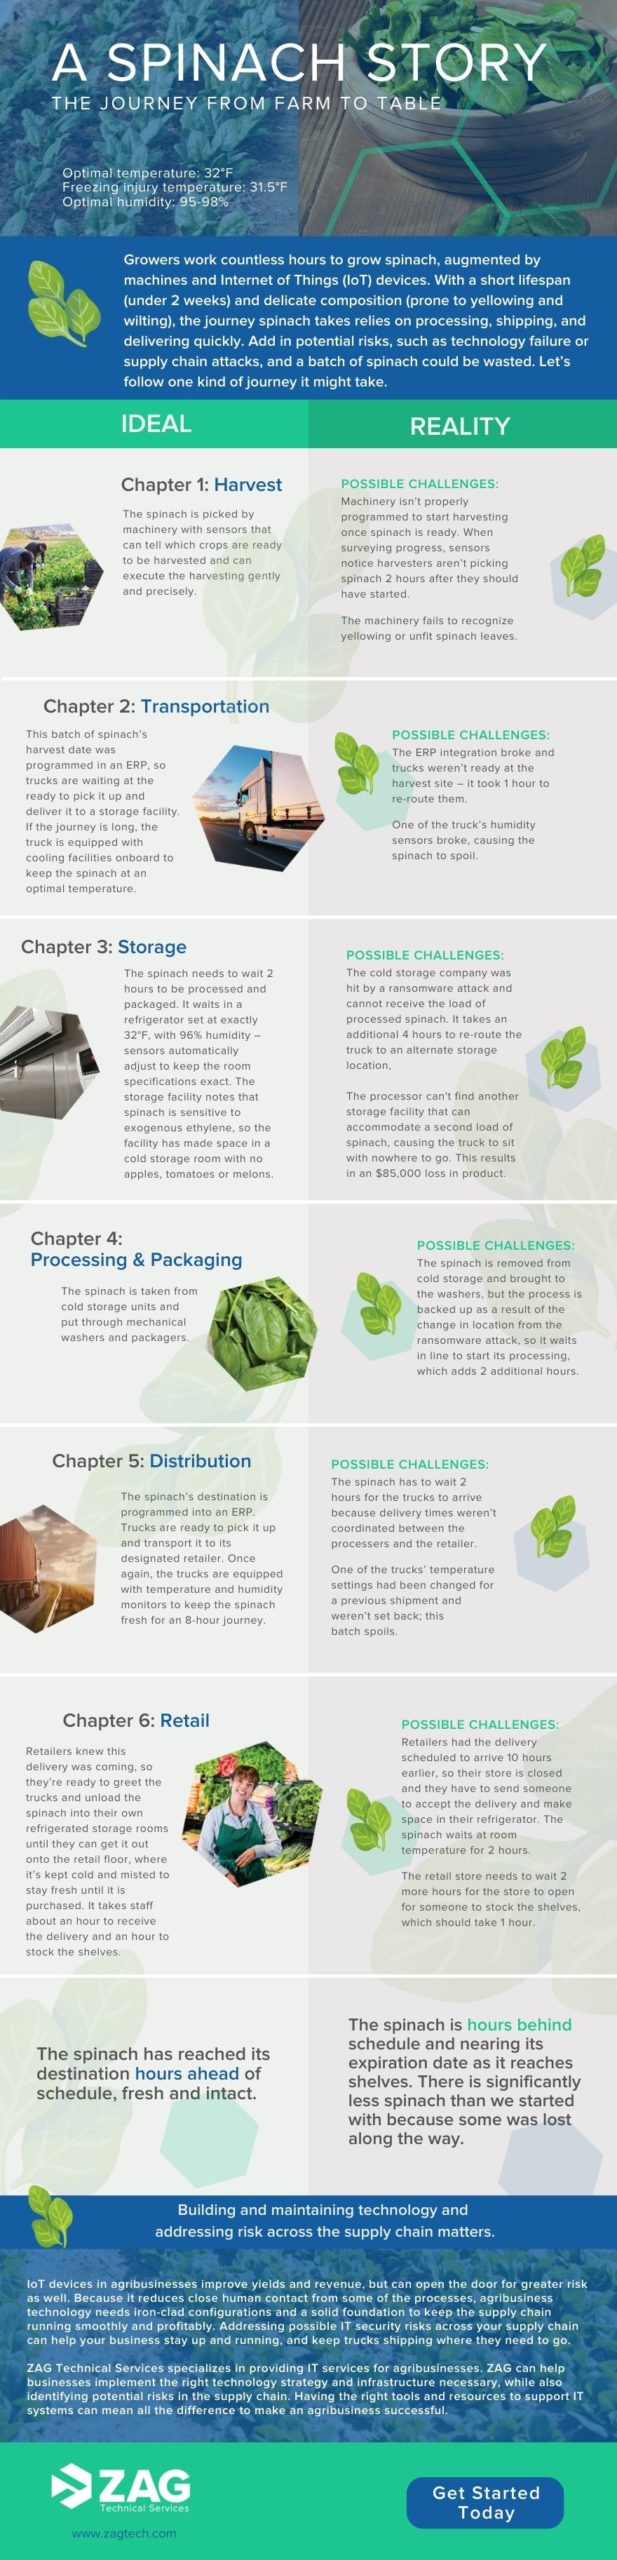 Infographic highlighting the journey that spinach takes in the supply chain